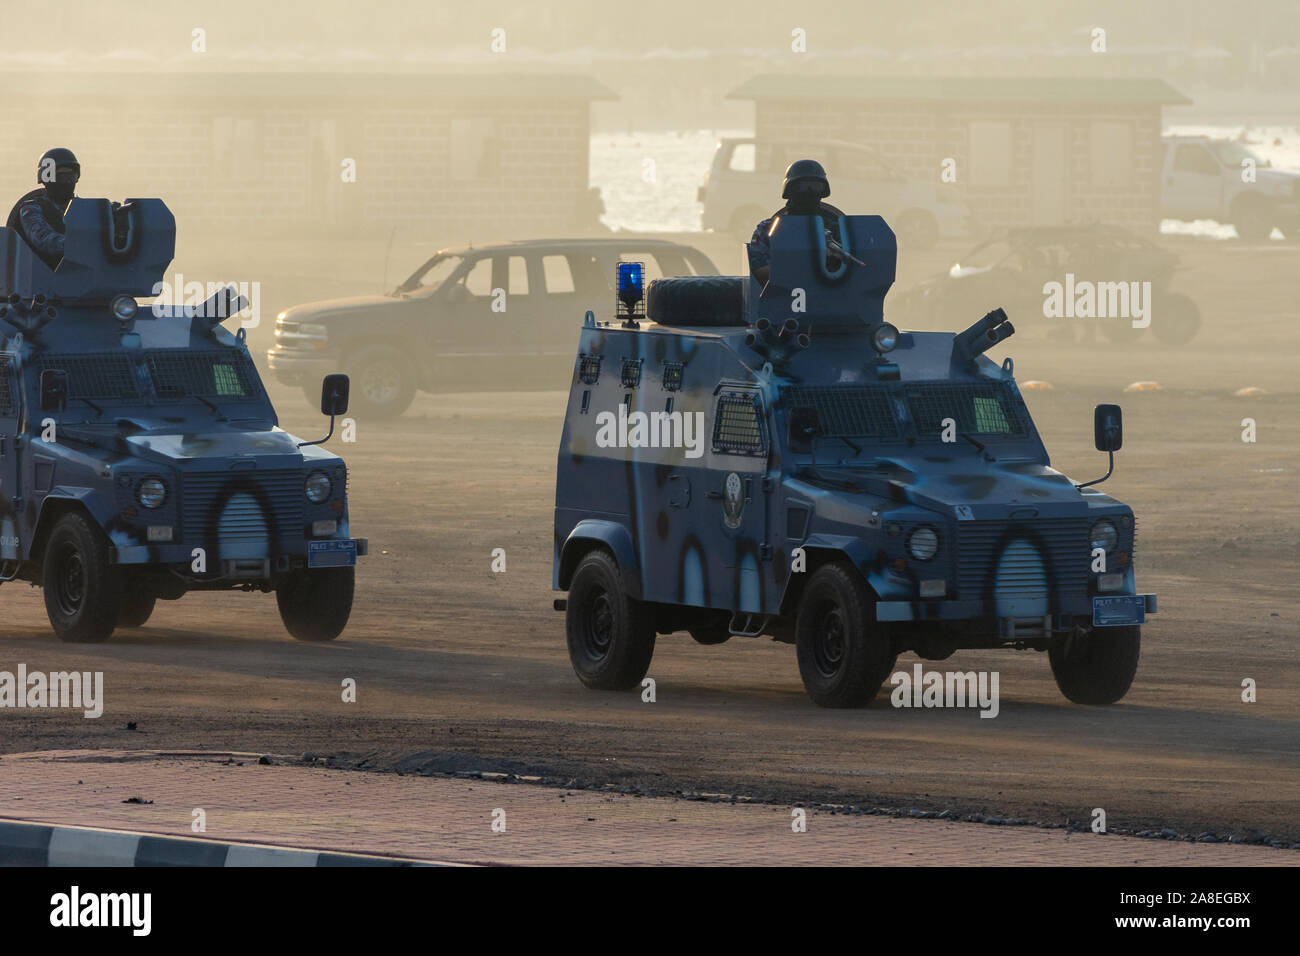 Military police vehicles enforcing law and order in protest, war, and conflict driving across the desert, Stock Photo